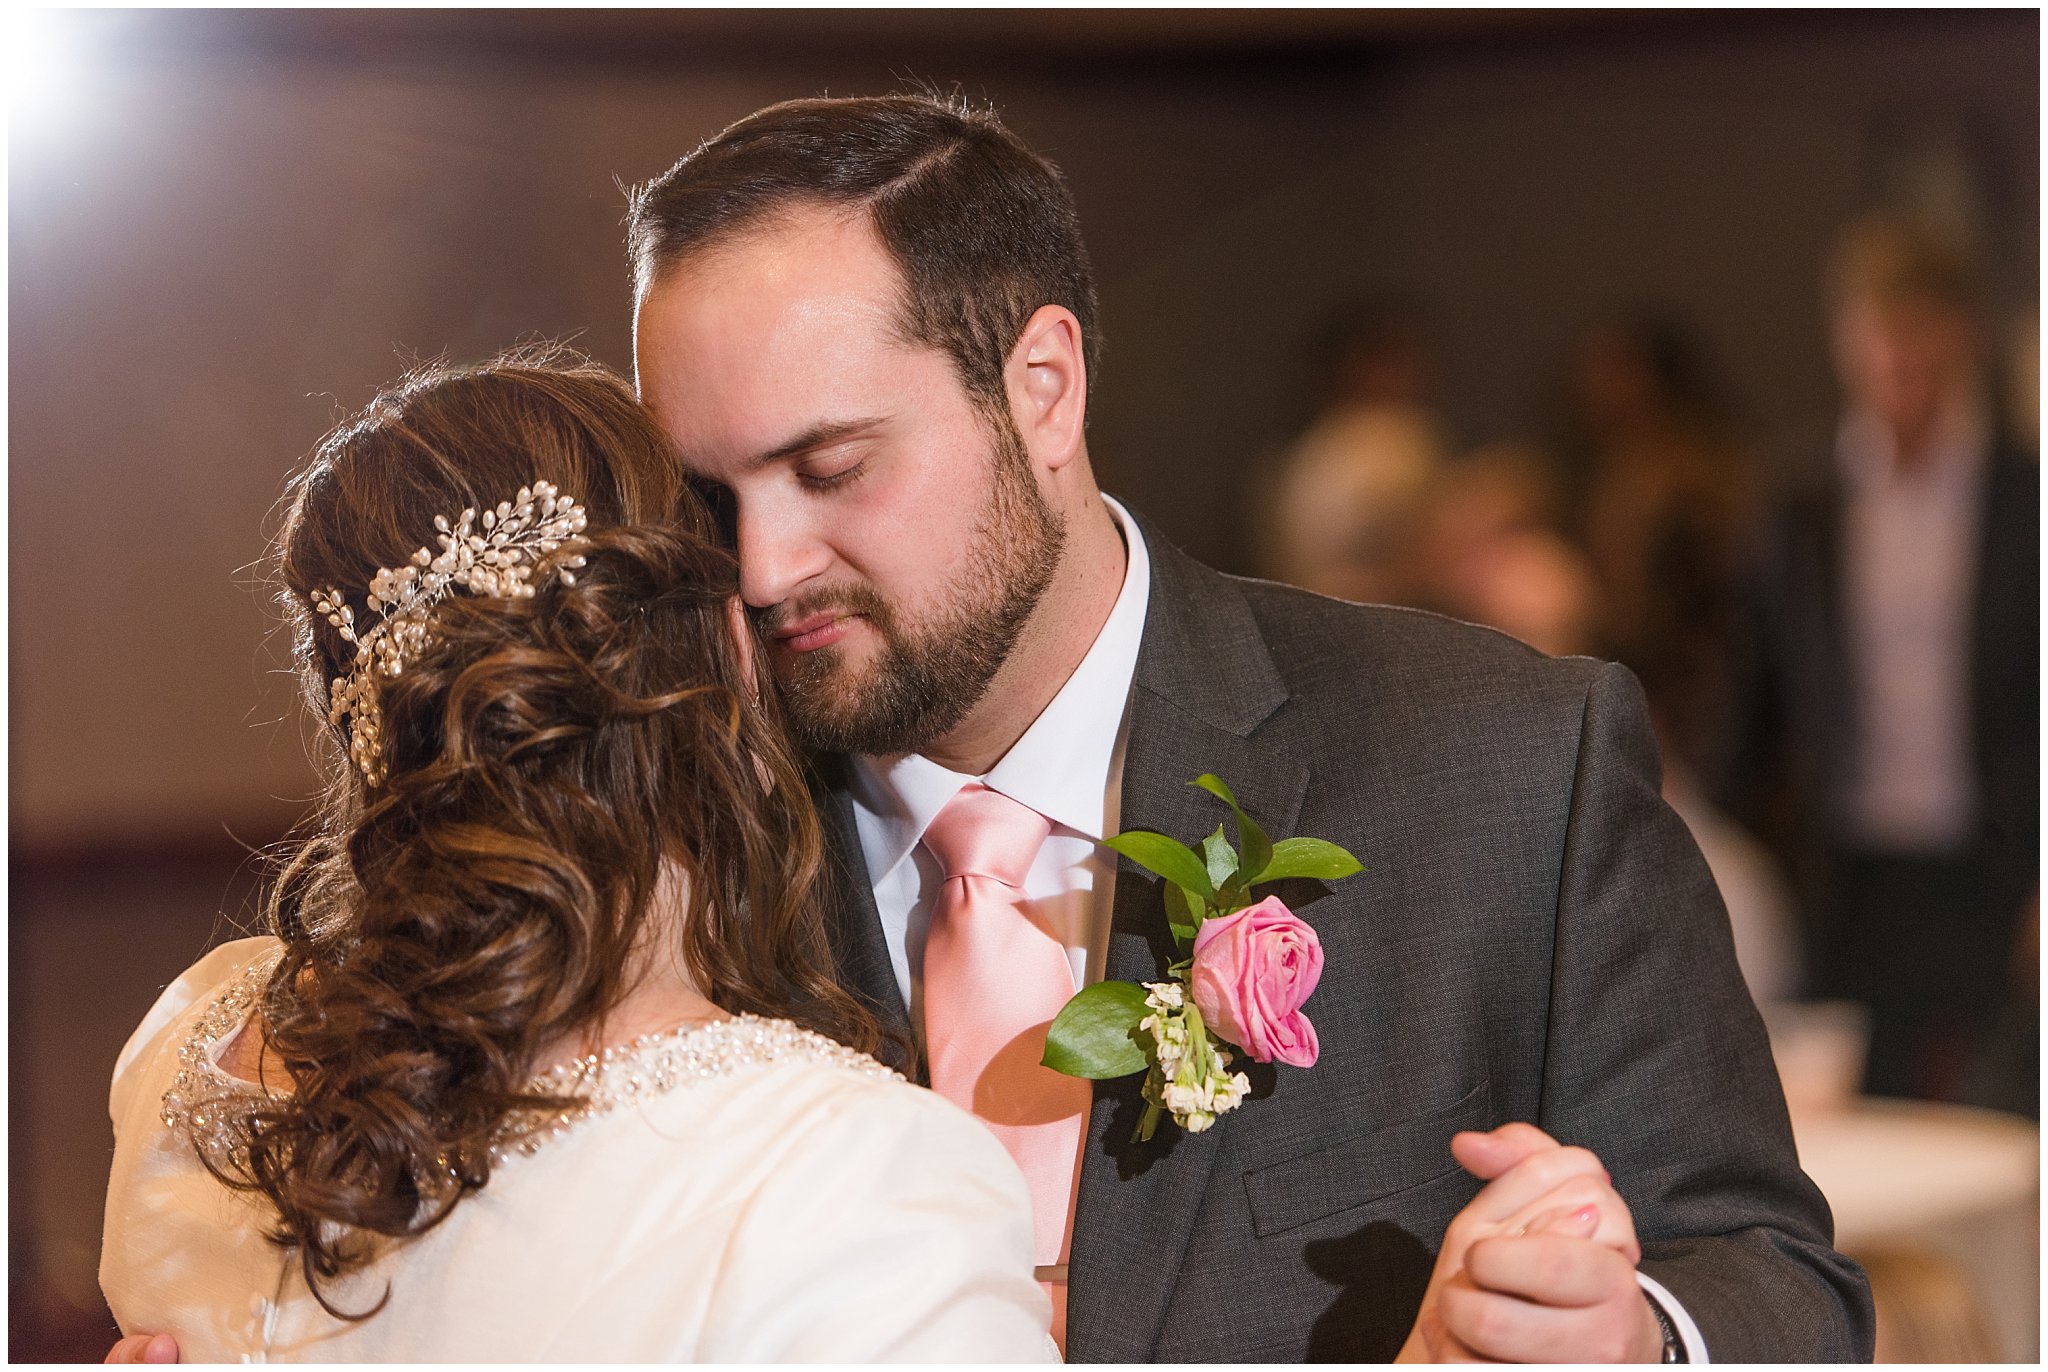 Emotional moment bride and groom first dance | Ogden Temple Wedding | Jessie and Dallin Photography